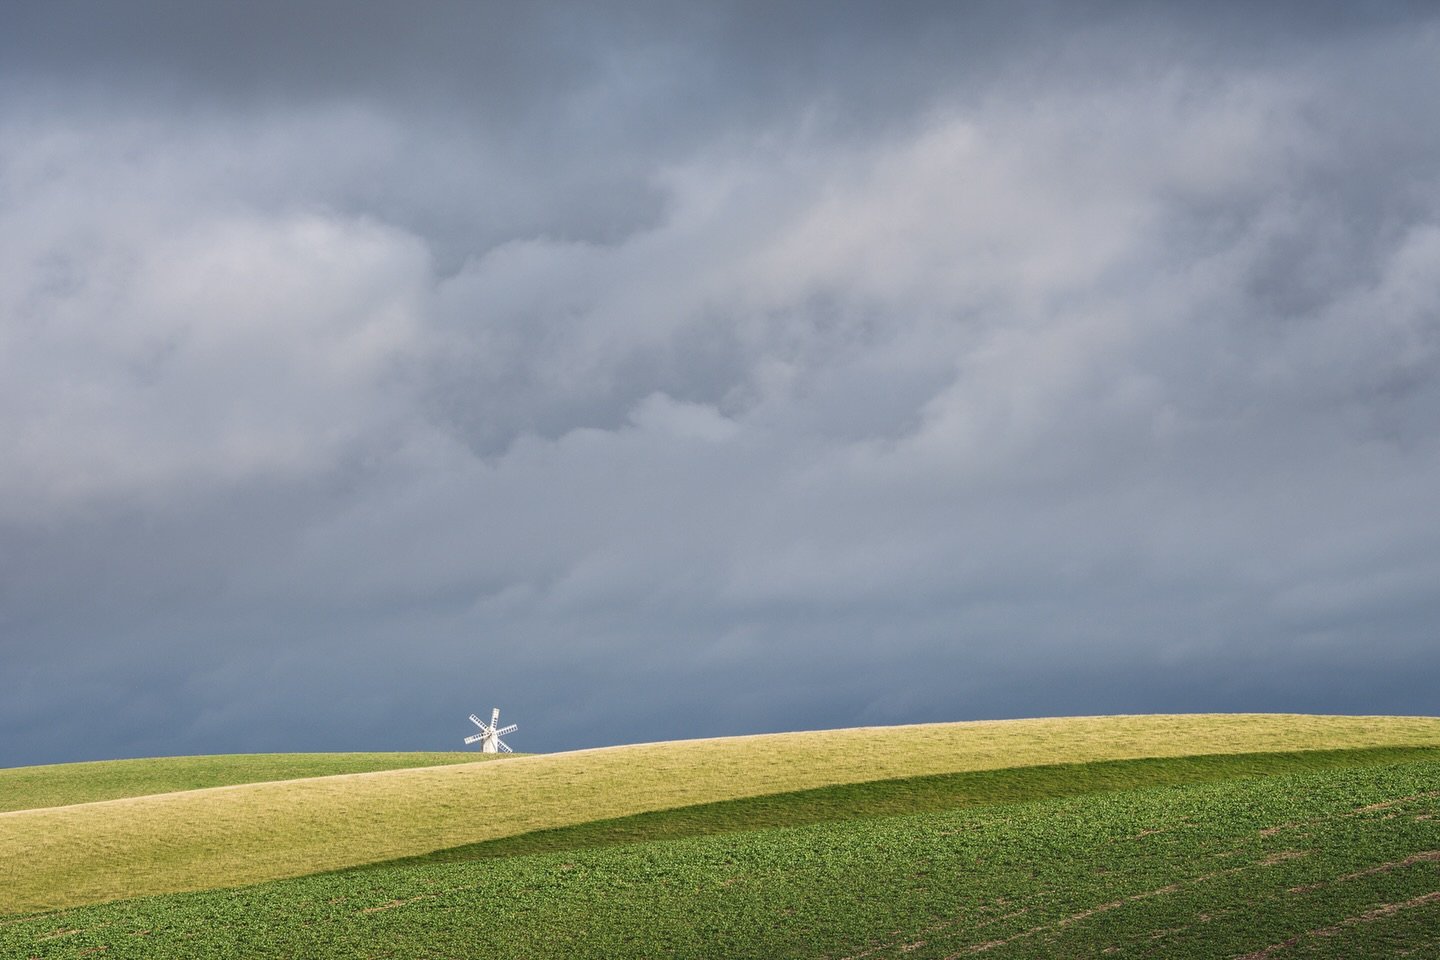 In praise of stormy days on the South Downs. 

#fieldwork #southdowns #sussex #brightonphotography #asterisk